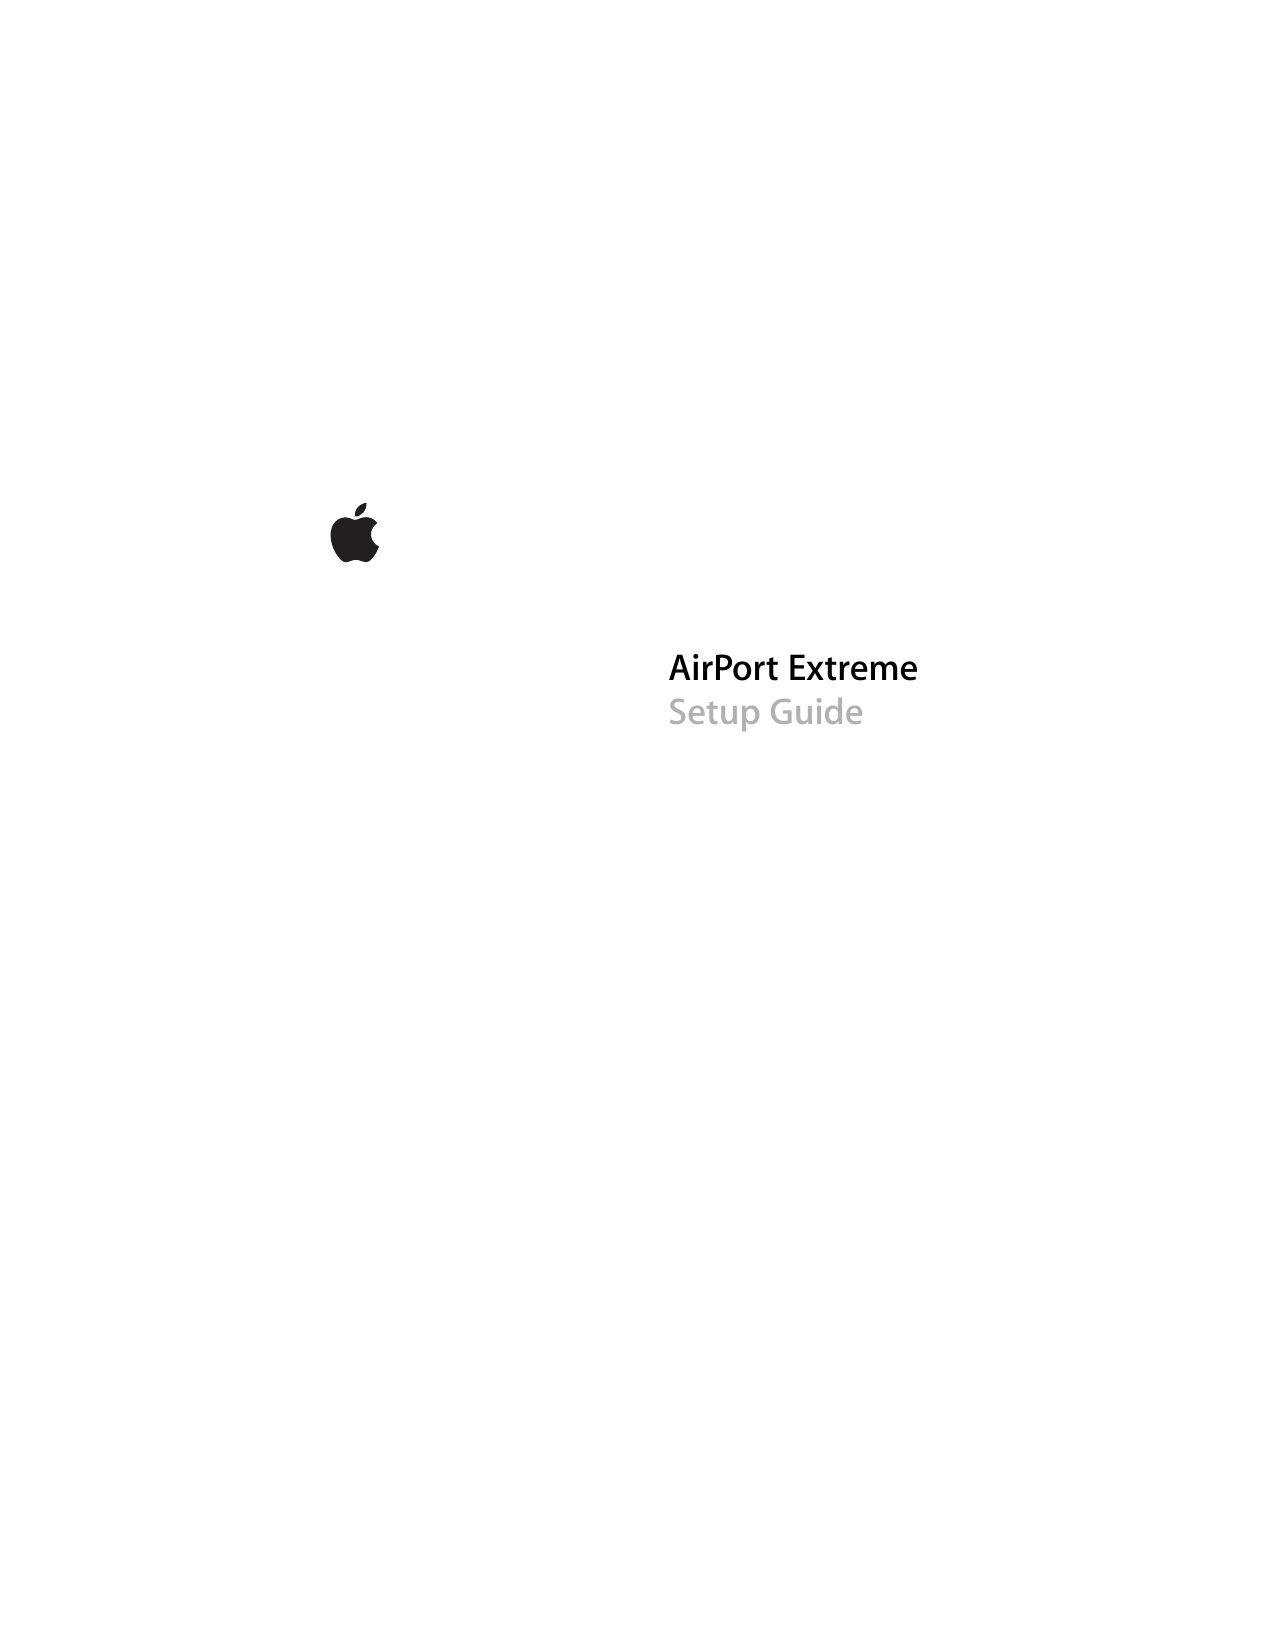    AirPort Extreme Setup Guide